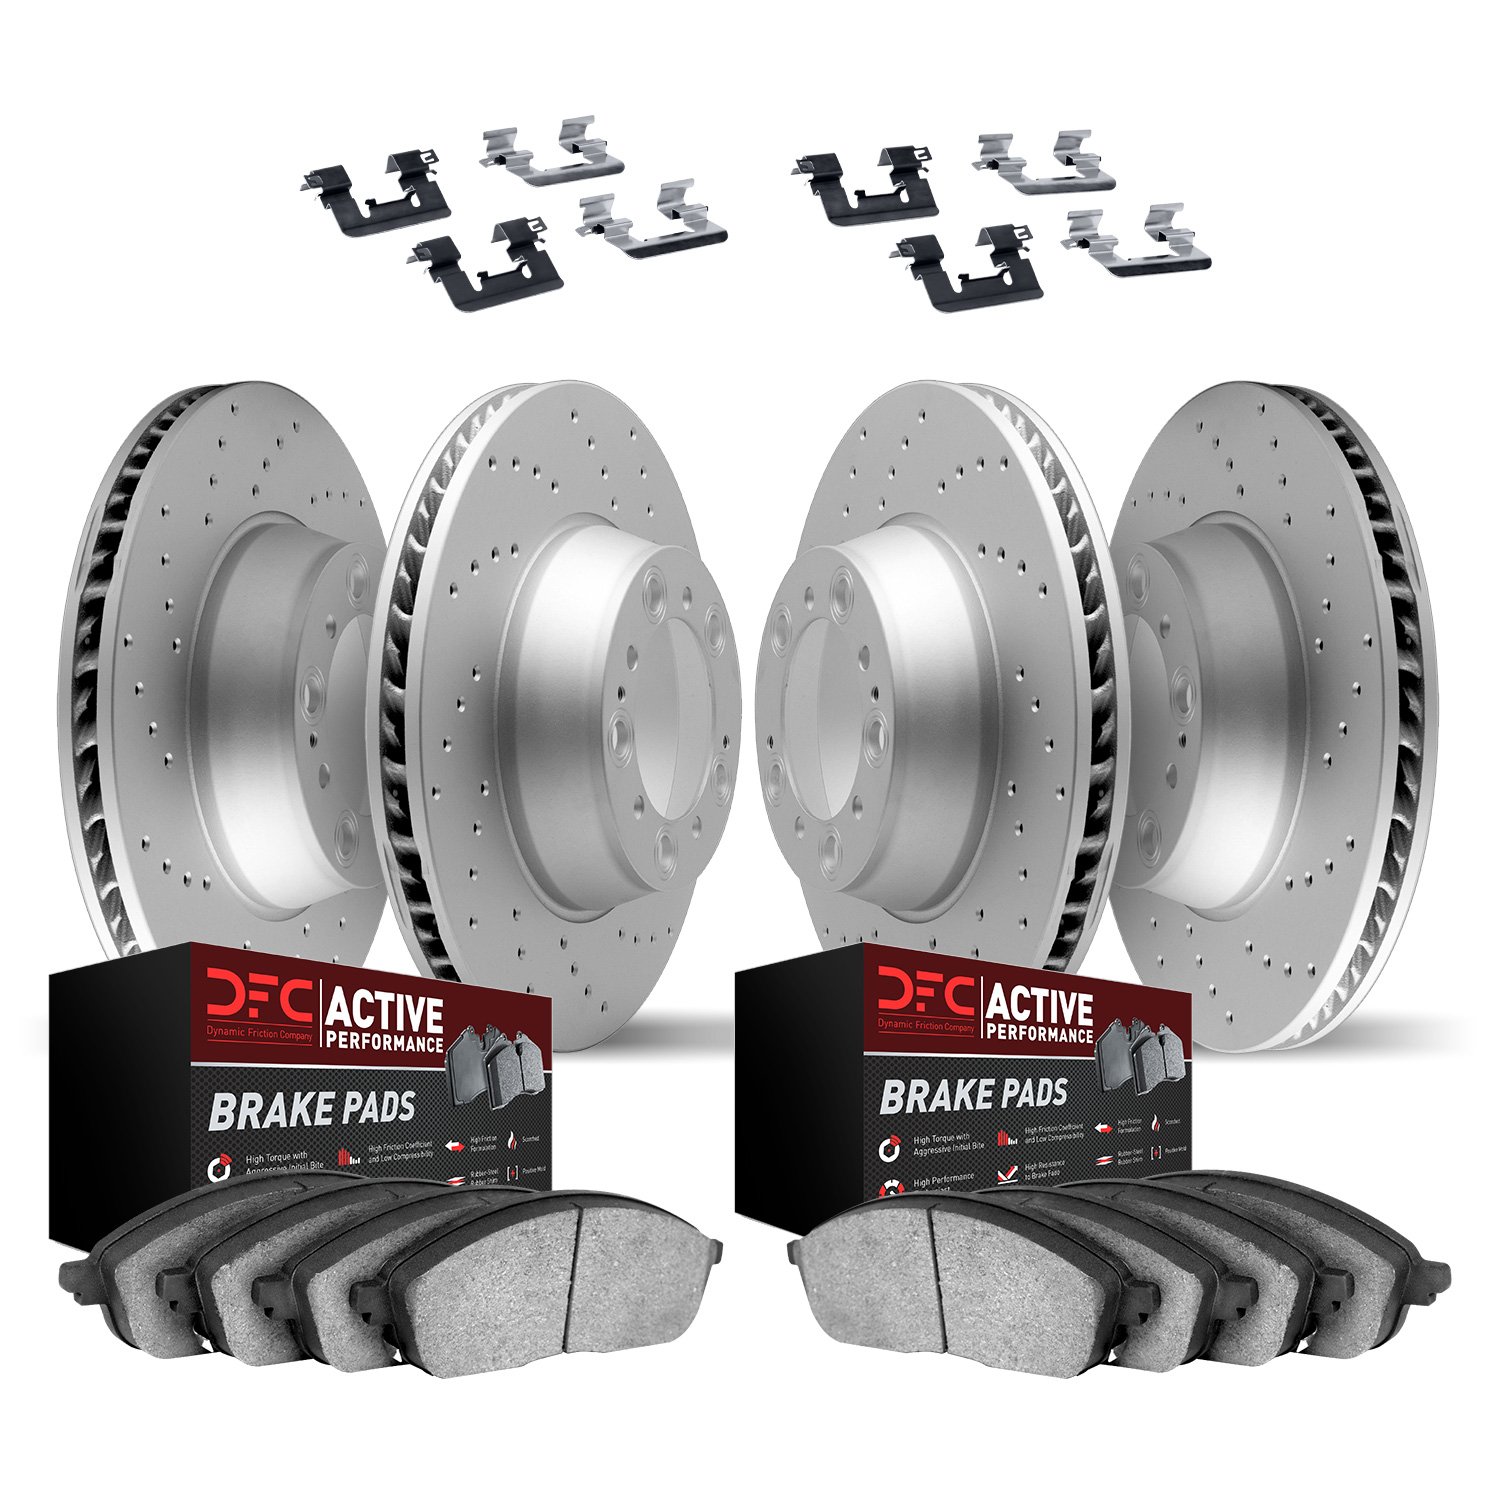 2714-74030 Geoperformance Drilled Brake Rotors with Active Performance Pads Kit & Hardware, 2003-2010 Multiple Makes/Models, Pos